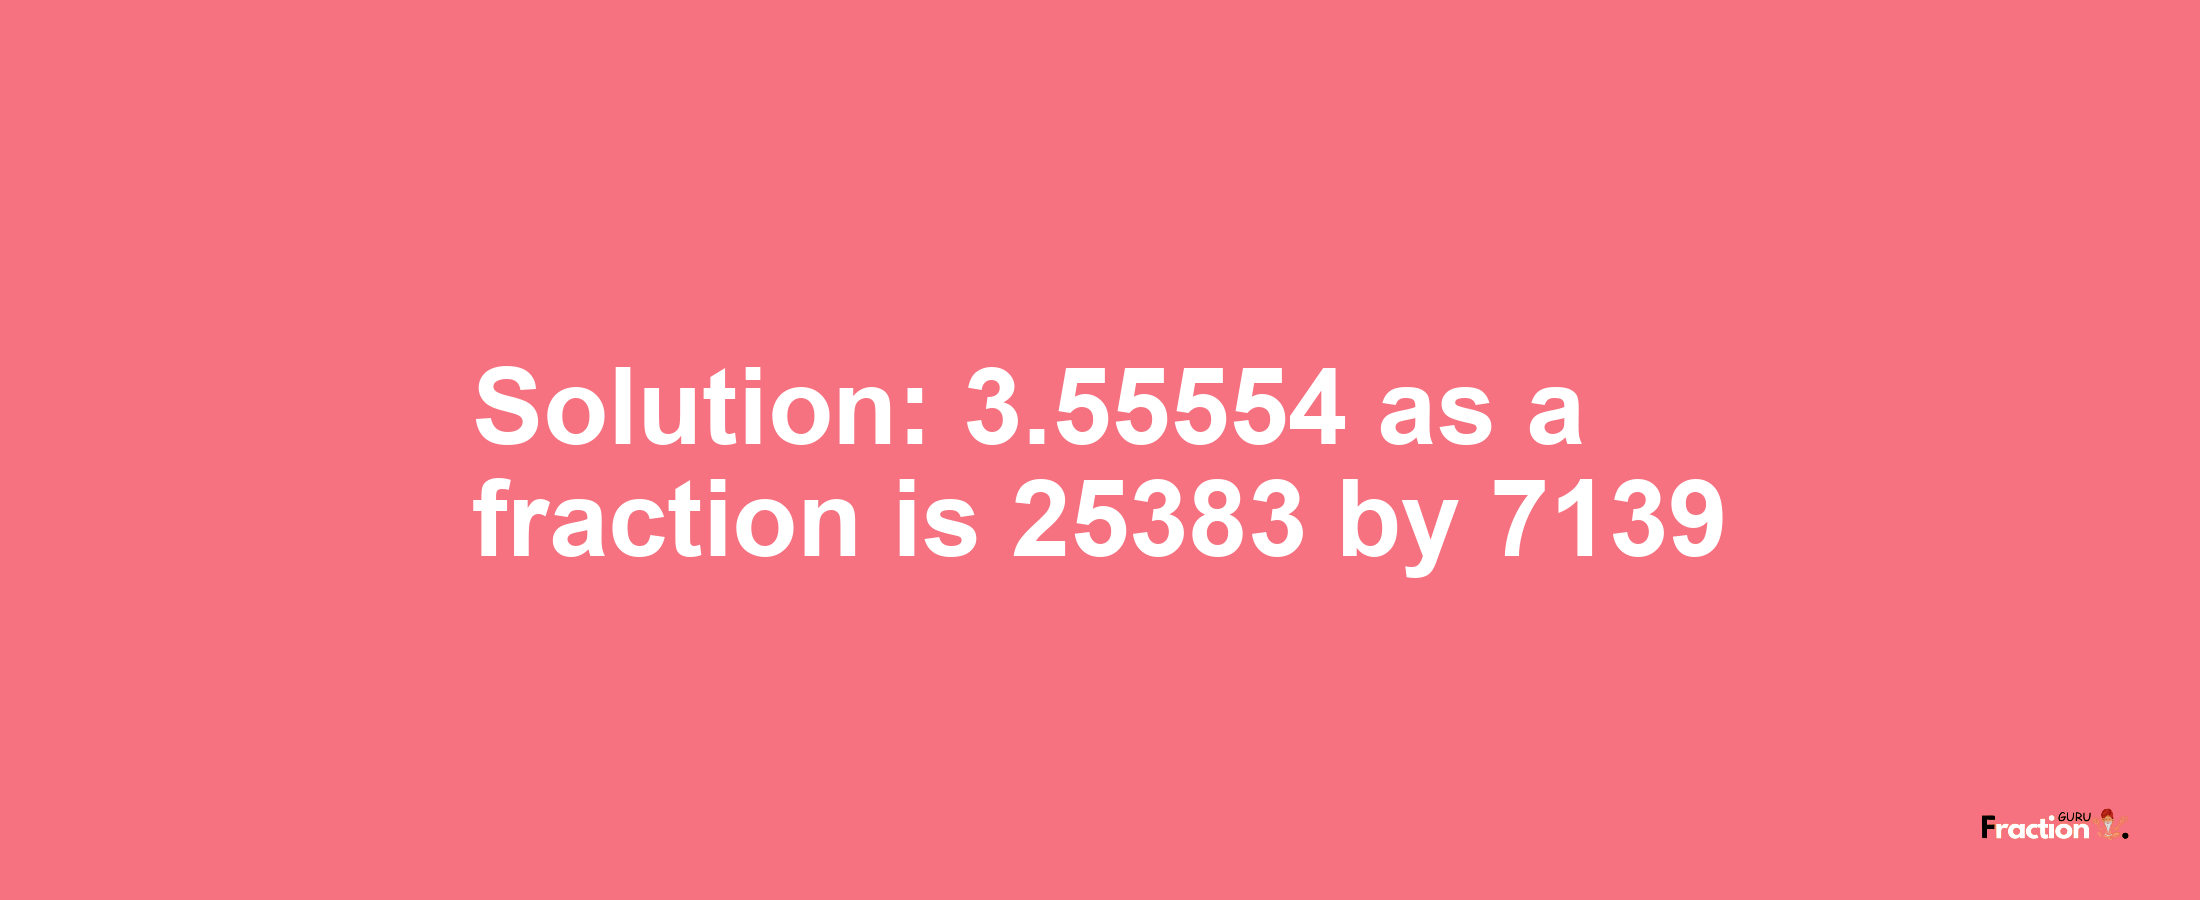 Solution:3.55554 as a fraction is 25383/7139